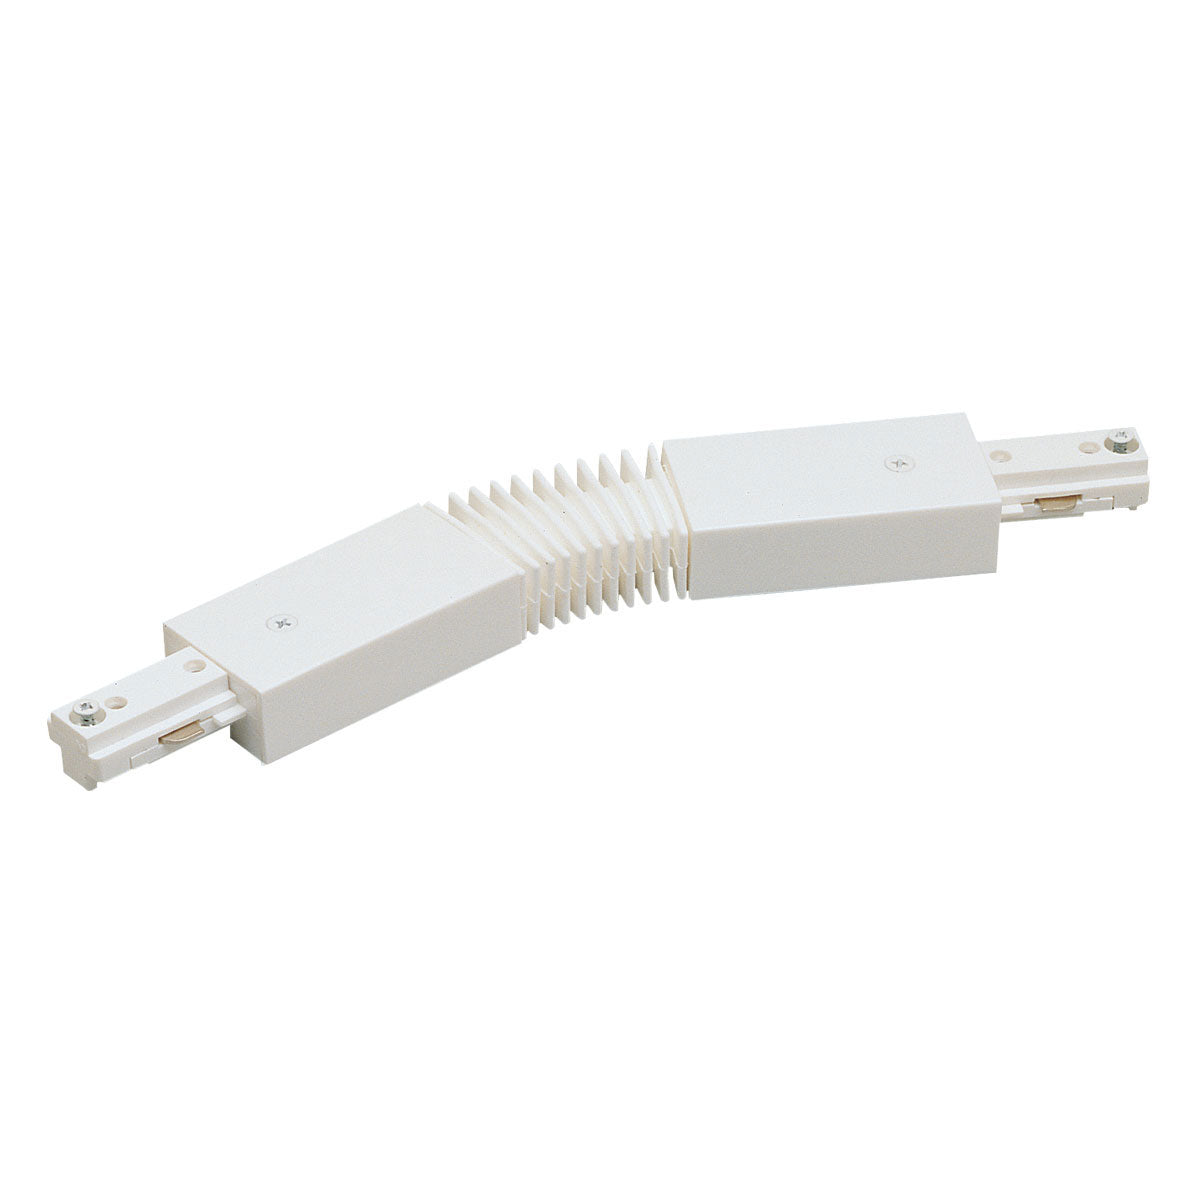 Nora Lighting NT-309W - Track - Flexible connector for 1 Circuit Track, White